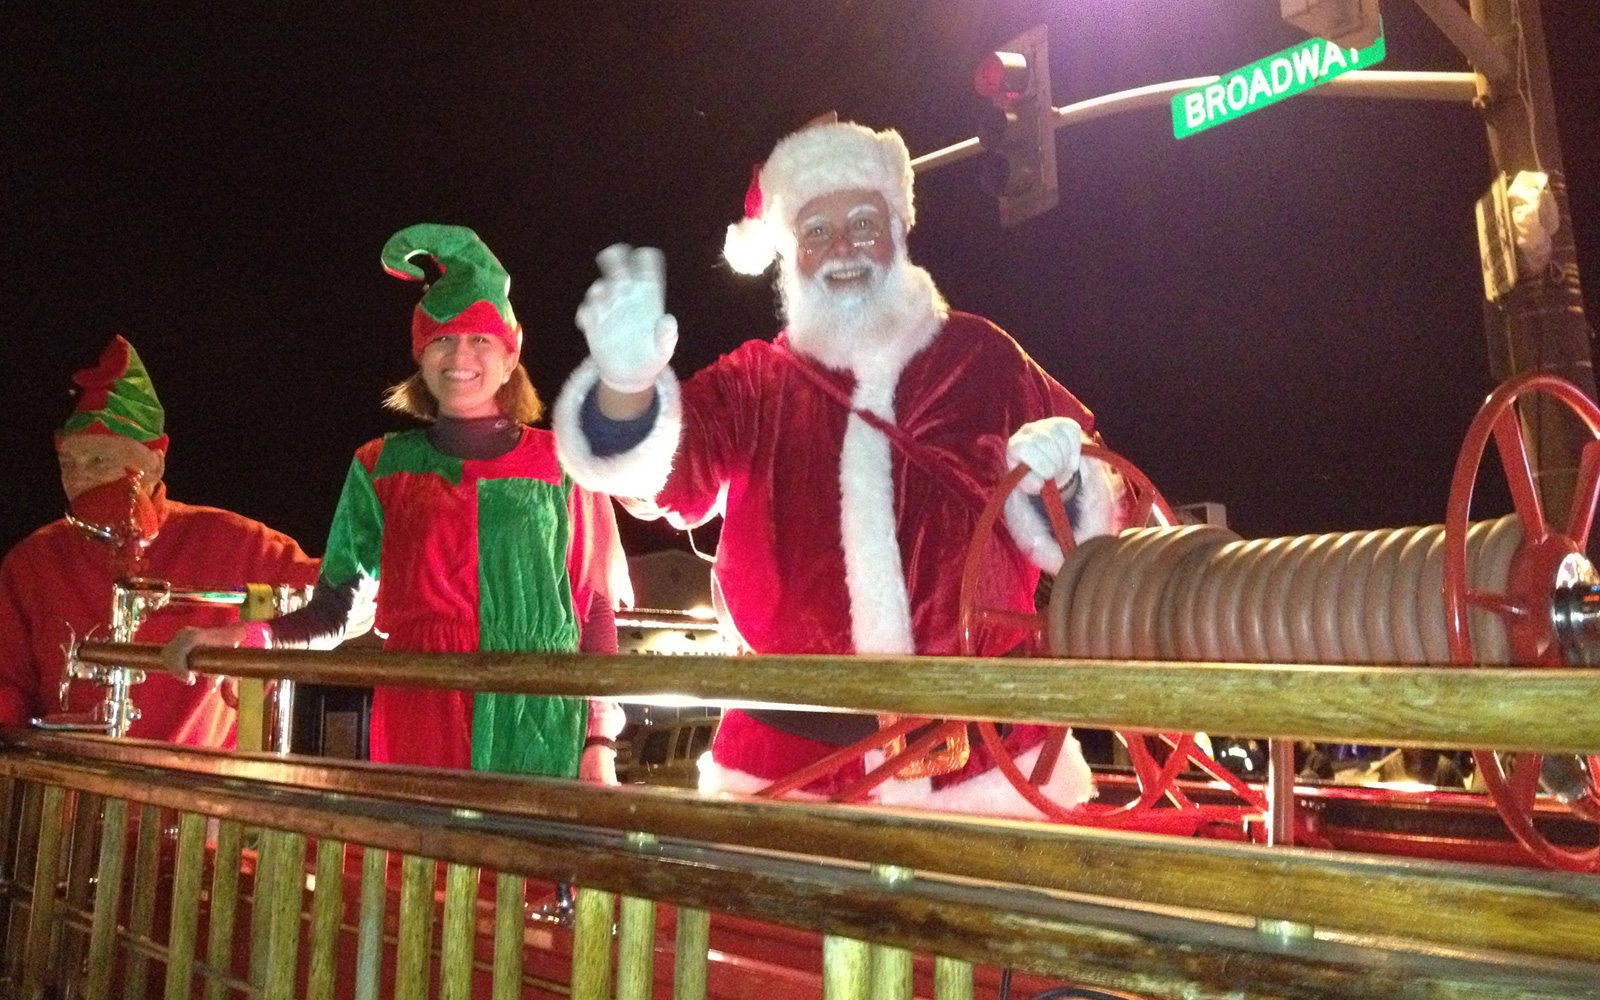 The Seaside Parade of Lights is one of many holiday festivities